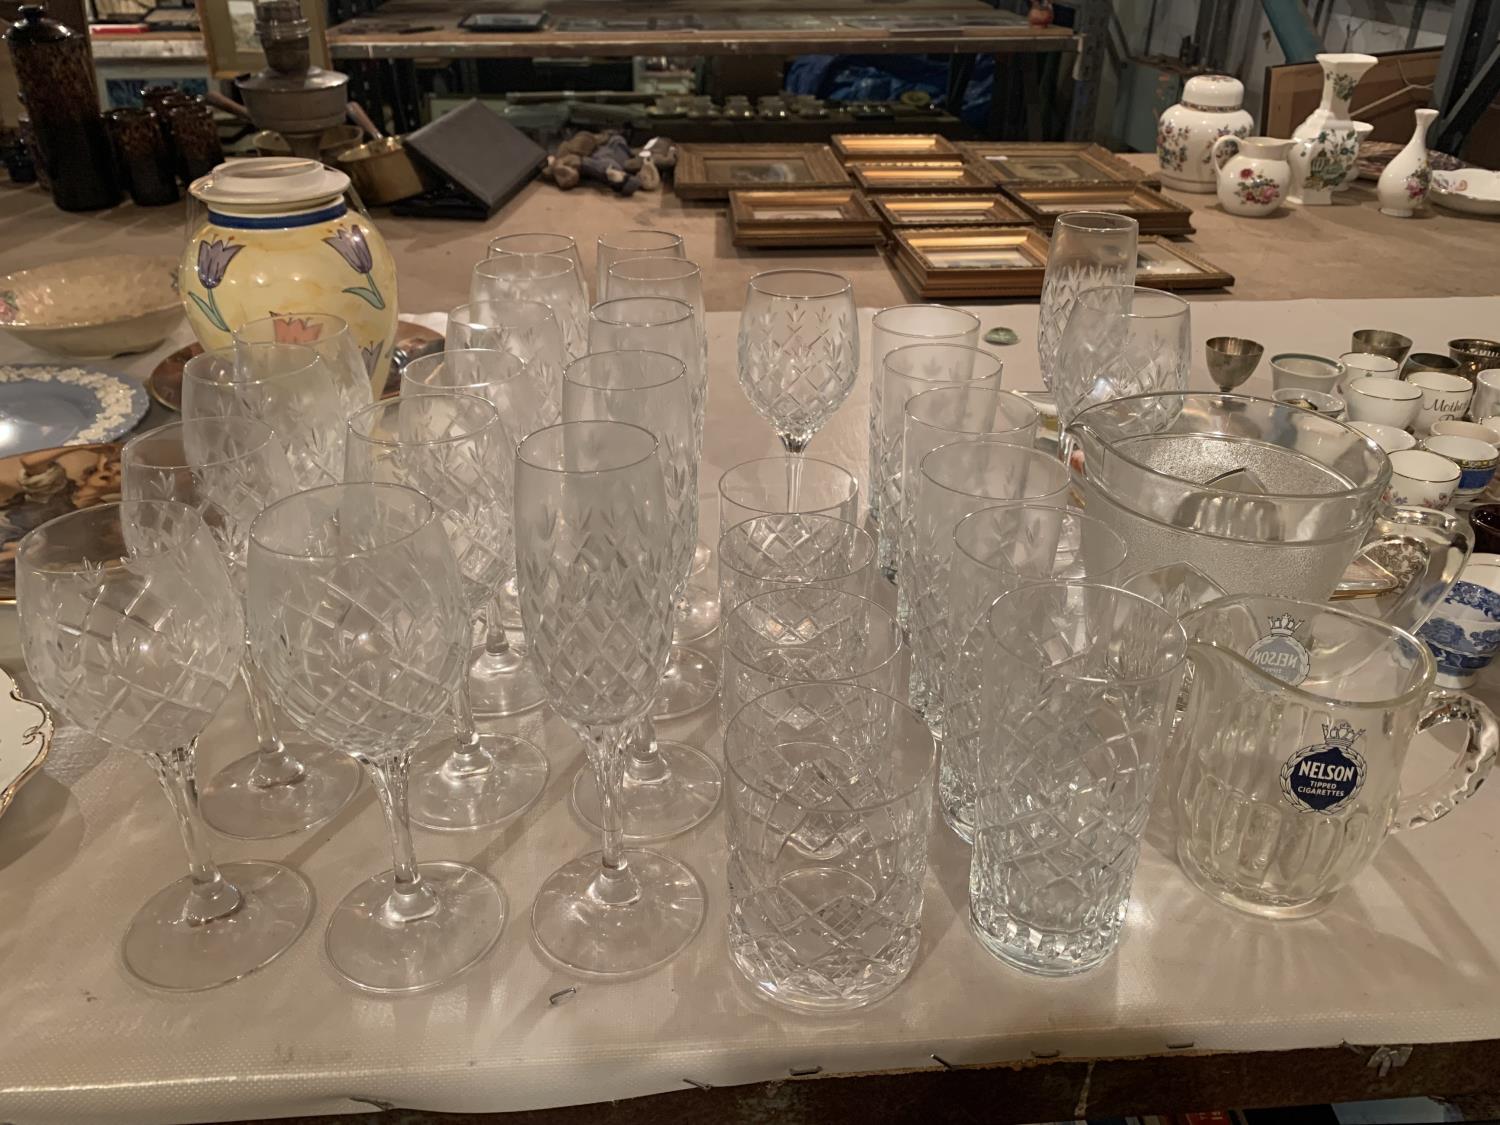 A COLLECTION OF GLASSES TO INCLUDE STEMMED WINE AND CHAMPAGNE GLASSES, WHISKEY TUMBLERS AND A NELSON